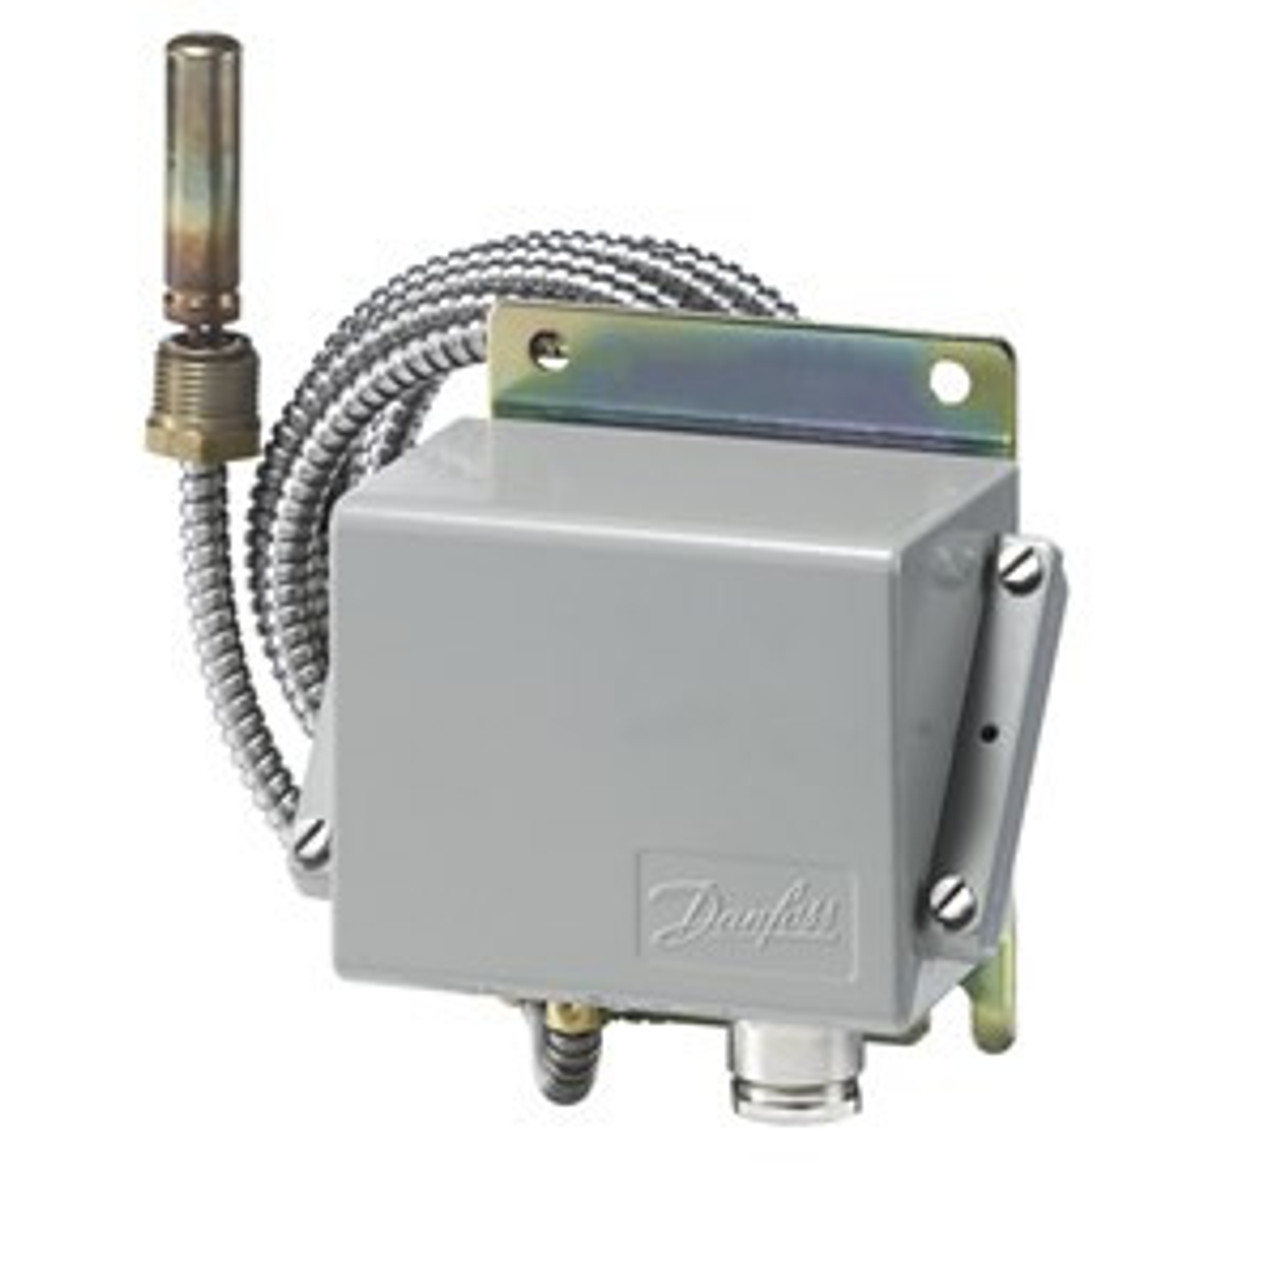 KPS79 thermostats